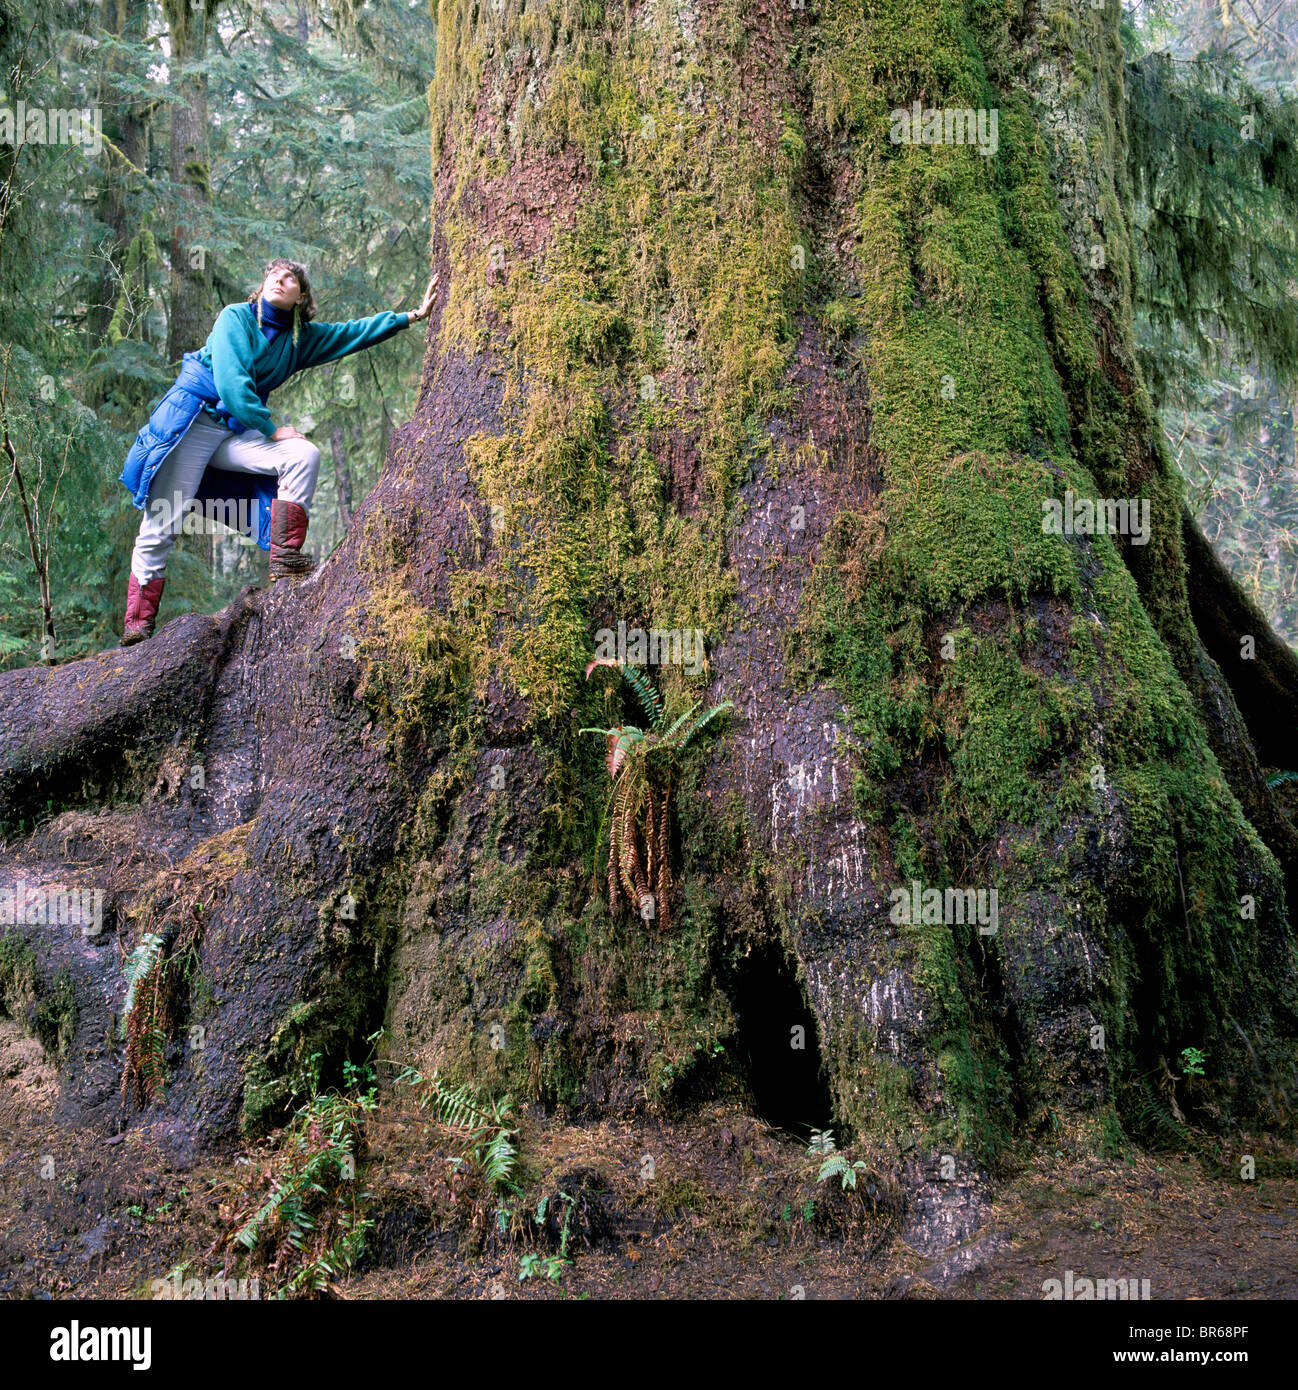 Carmanah Walbran Provincial Park, Vancouver Island, BC, British Columbia, Canada - Giant Sitka Spruce Tree (Picea sitchensis) Stock Photo